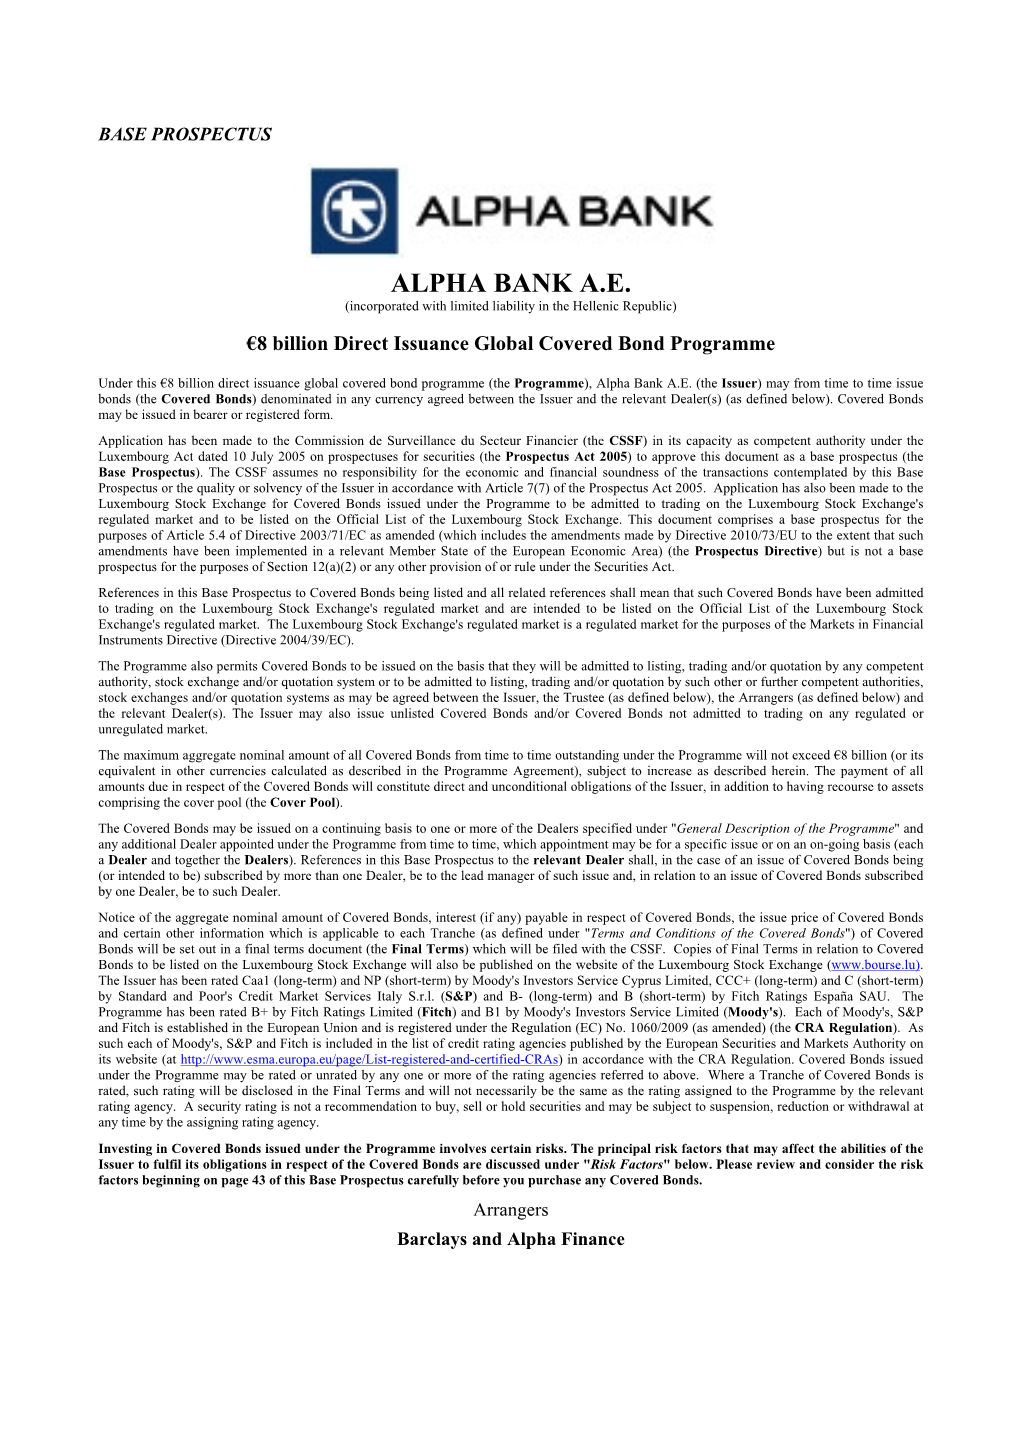 ALPHA BANK A.E. (Incorporated with Limited Liability in the Hellenic Republic) €8 Billion Direct Issuance Global Covered Bond Programme